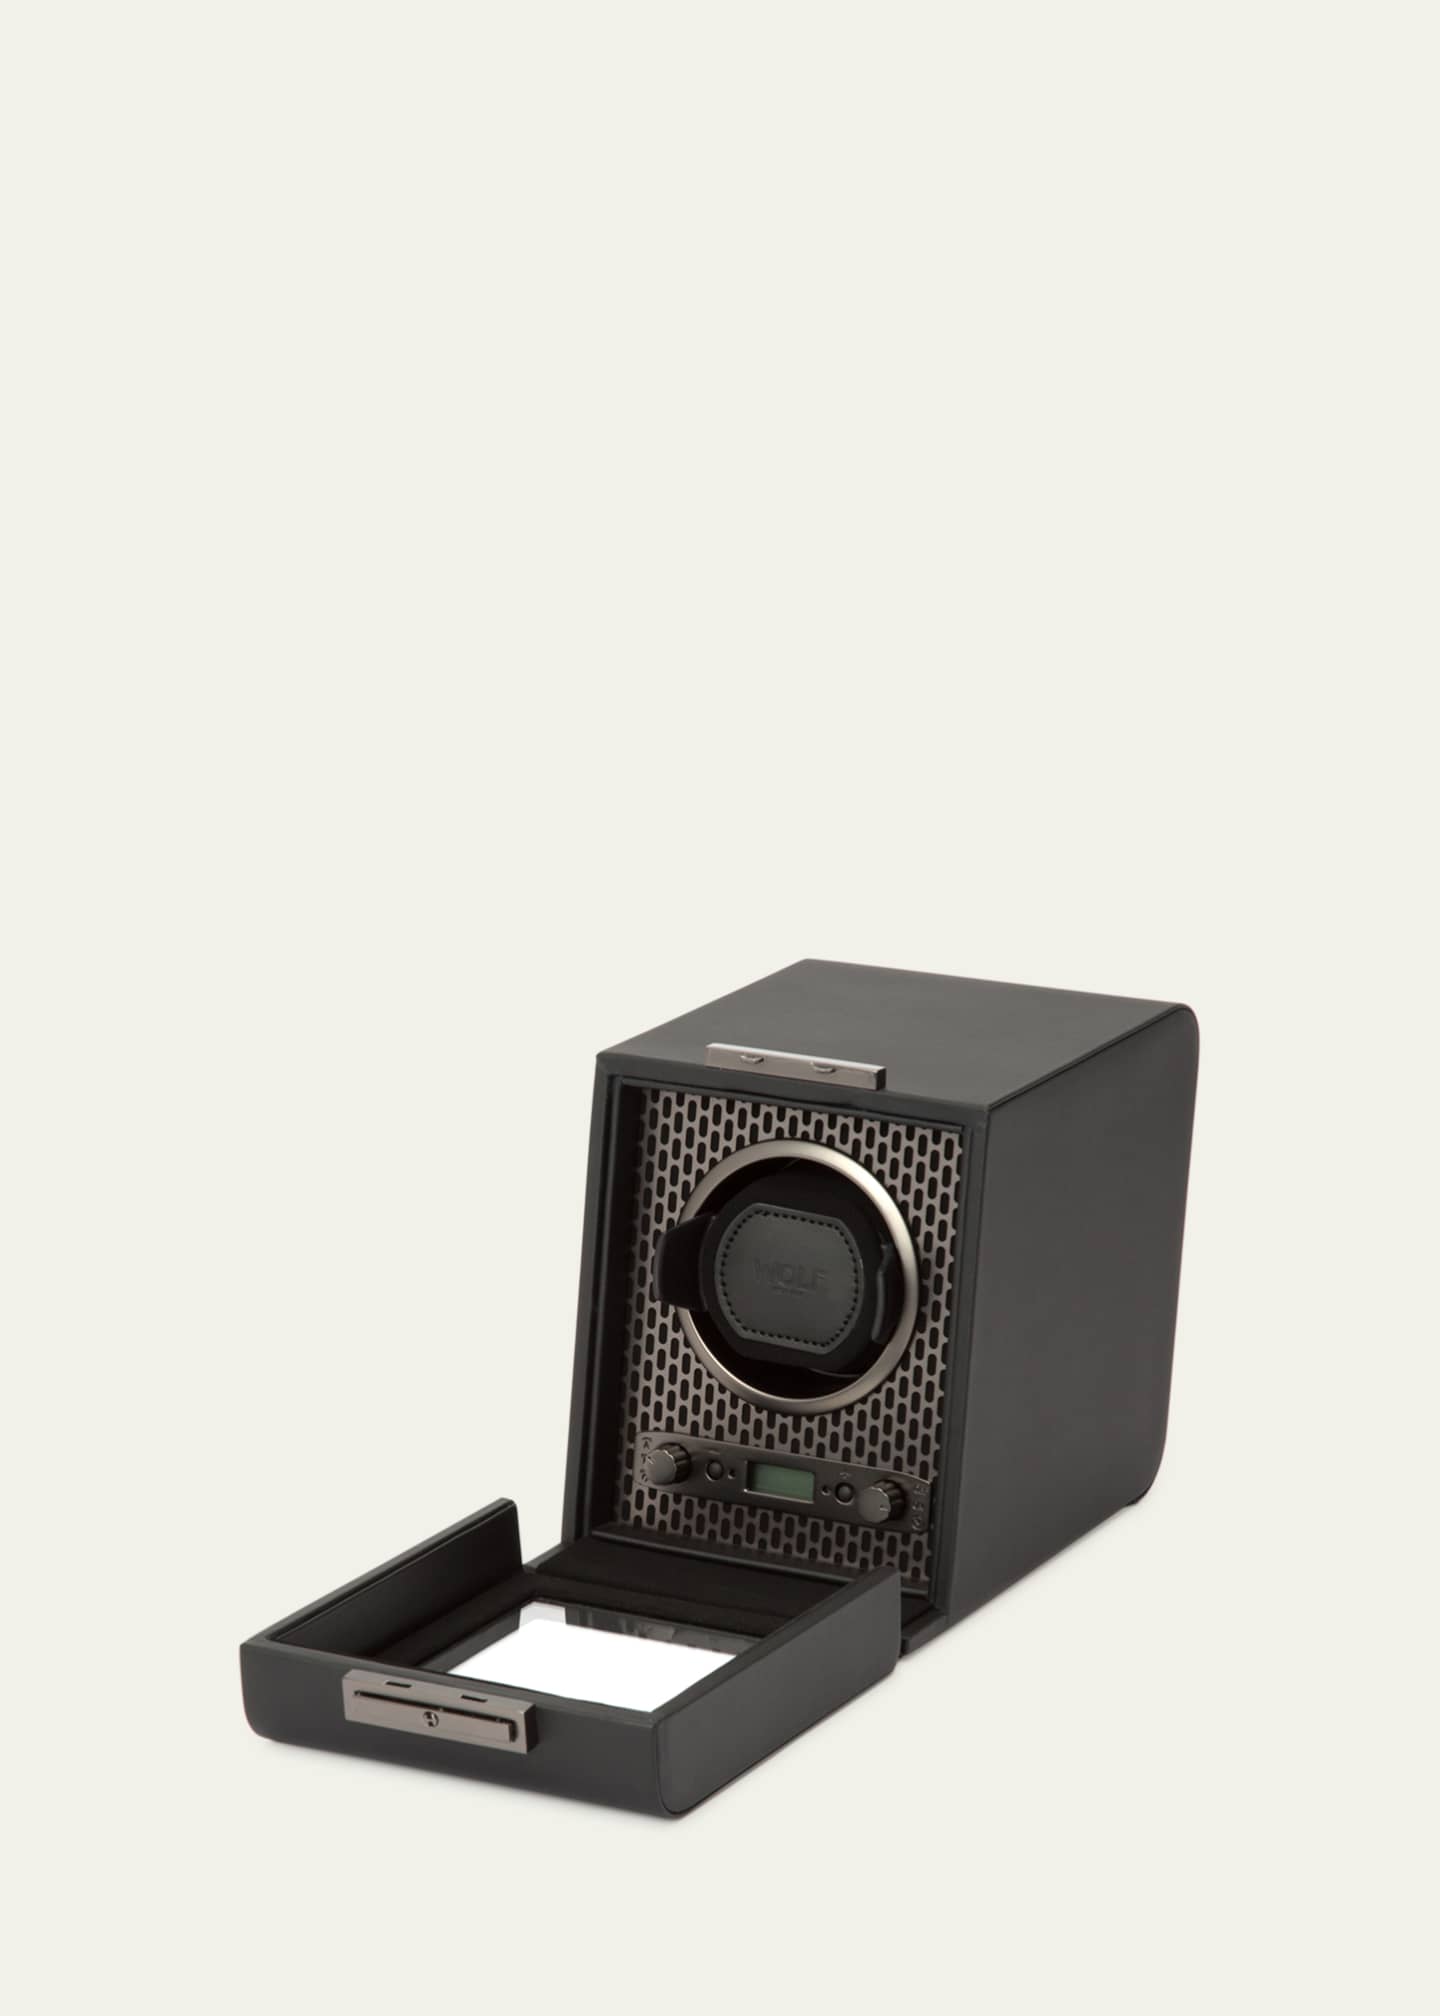 WOLF Axis Single Watch Winder Image 3 of 4